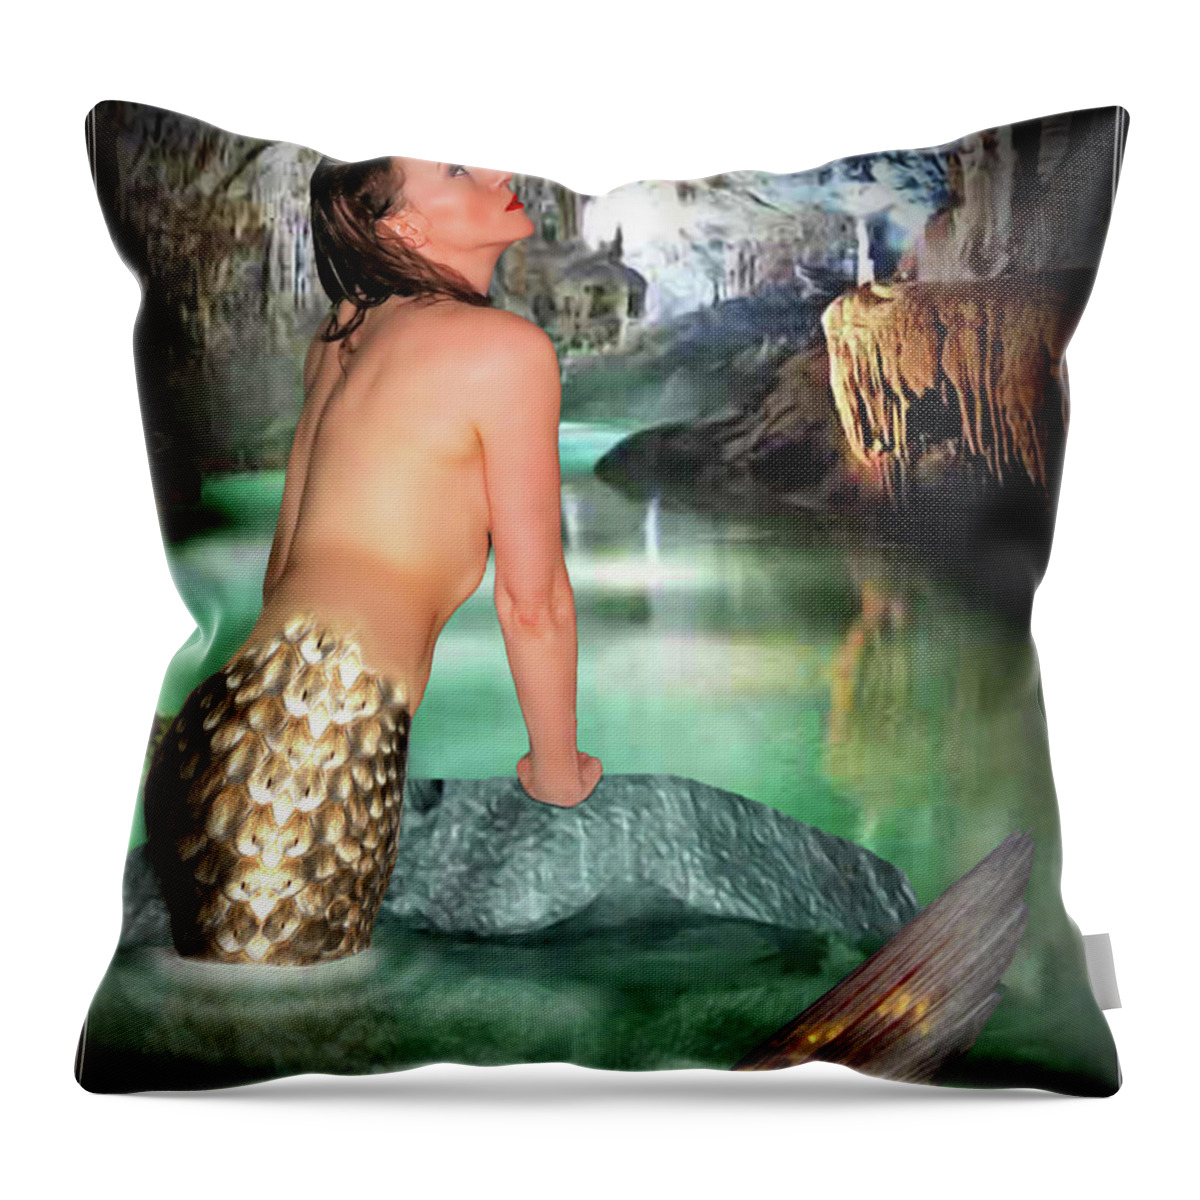 Mermaid Throw Pillow featuring the photograph Mermaid In A Cave by Jon Volden